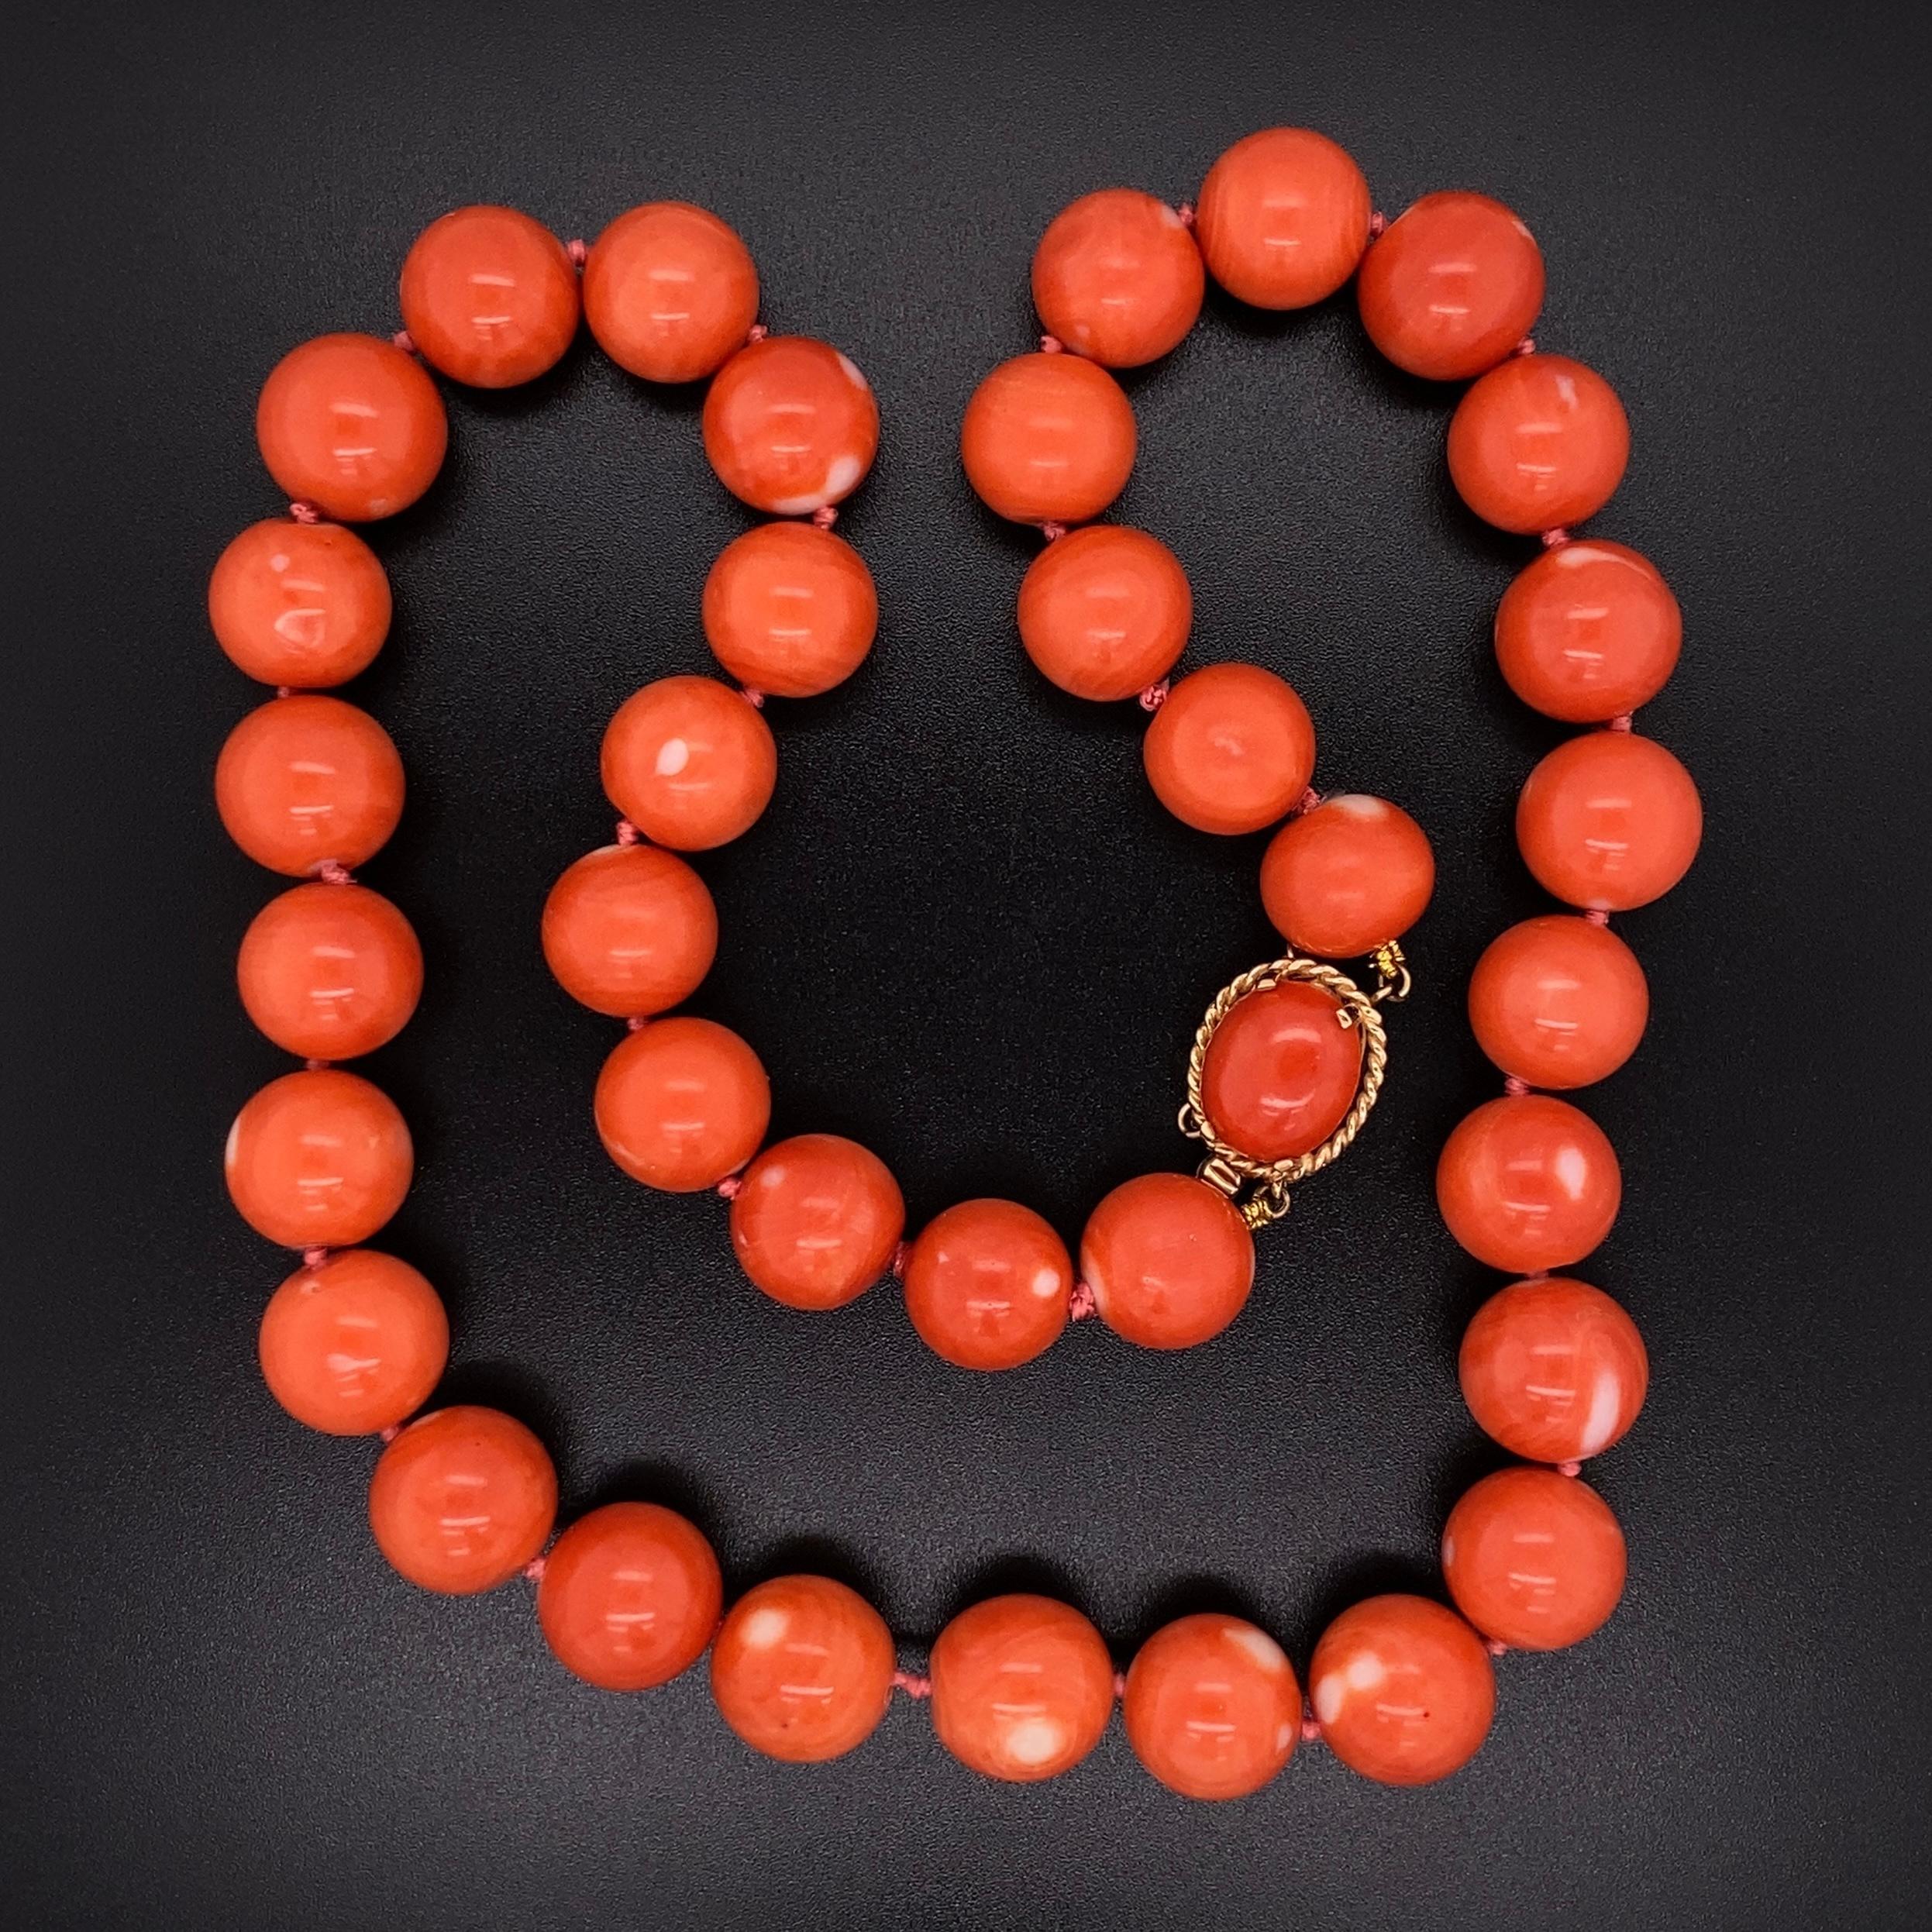 Simply Beautiful! 36 Round Bead Pacific Coral Necklace, each measuring approx. 11.50mm, held by a 14K Yellow Gold clasp inset with Coral. Hand strung with matching silk cord. The necklace measures approx. 17.75” long. Circa: 1960s. More Beautiful in